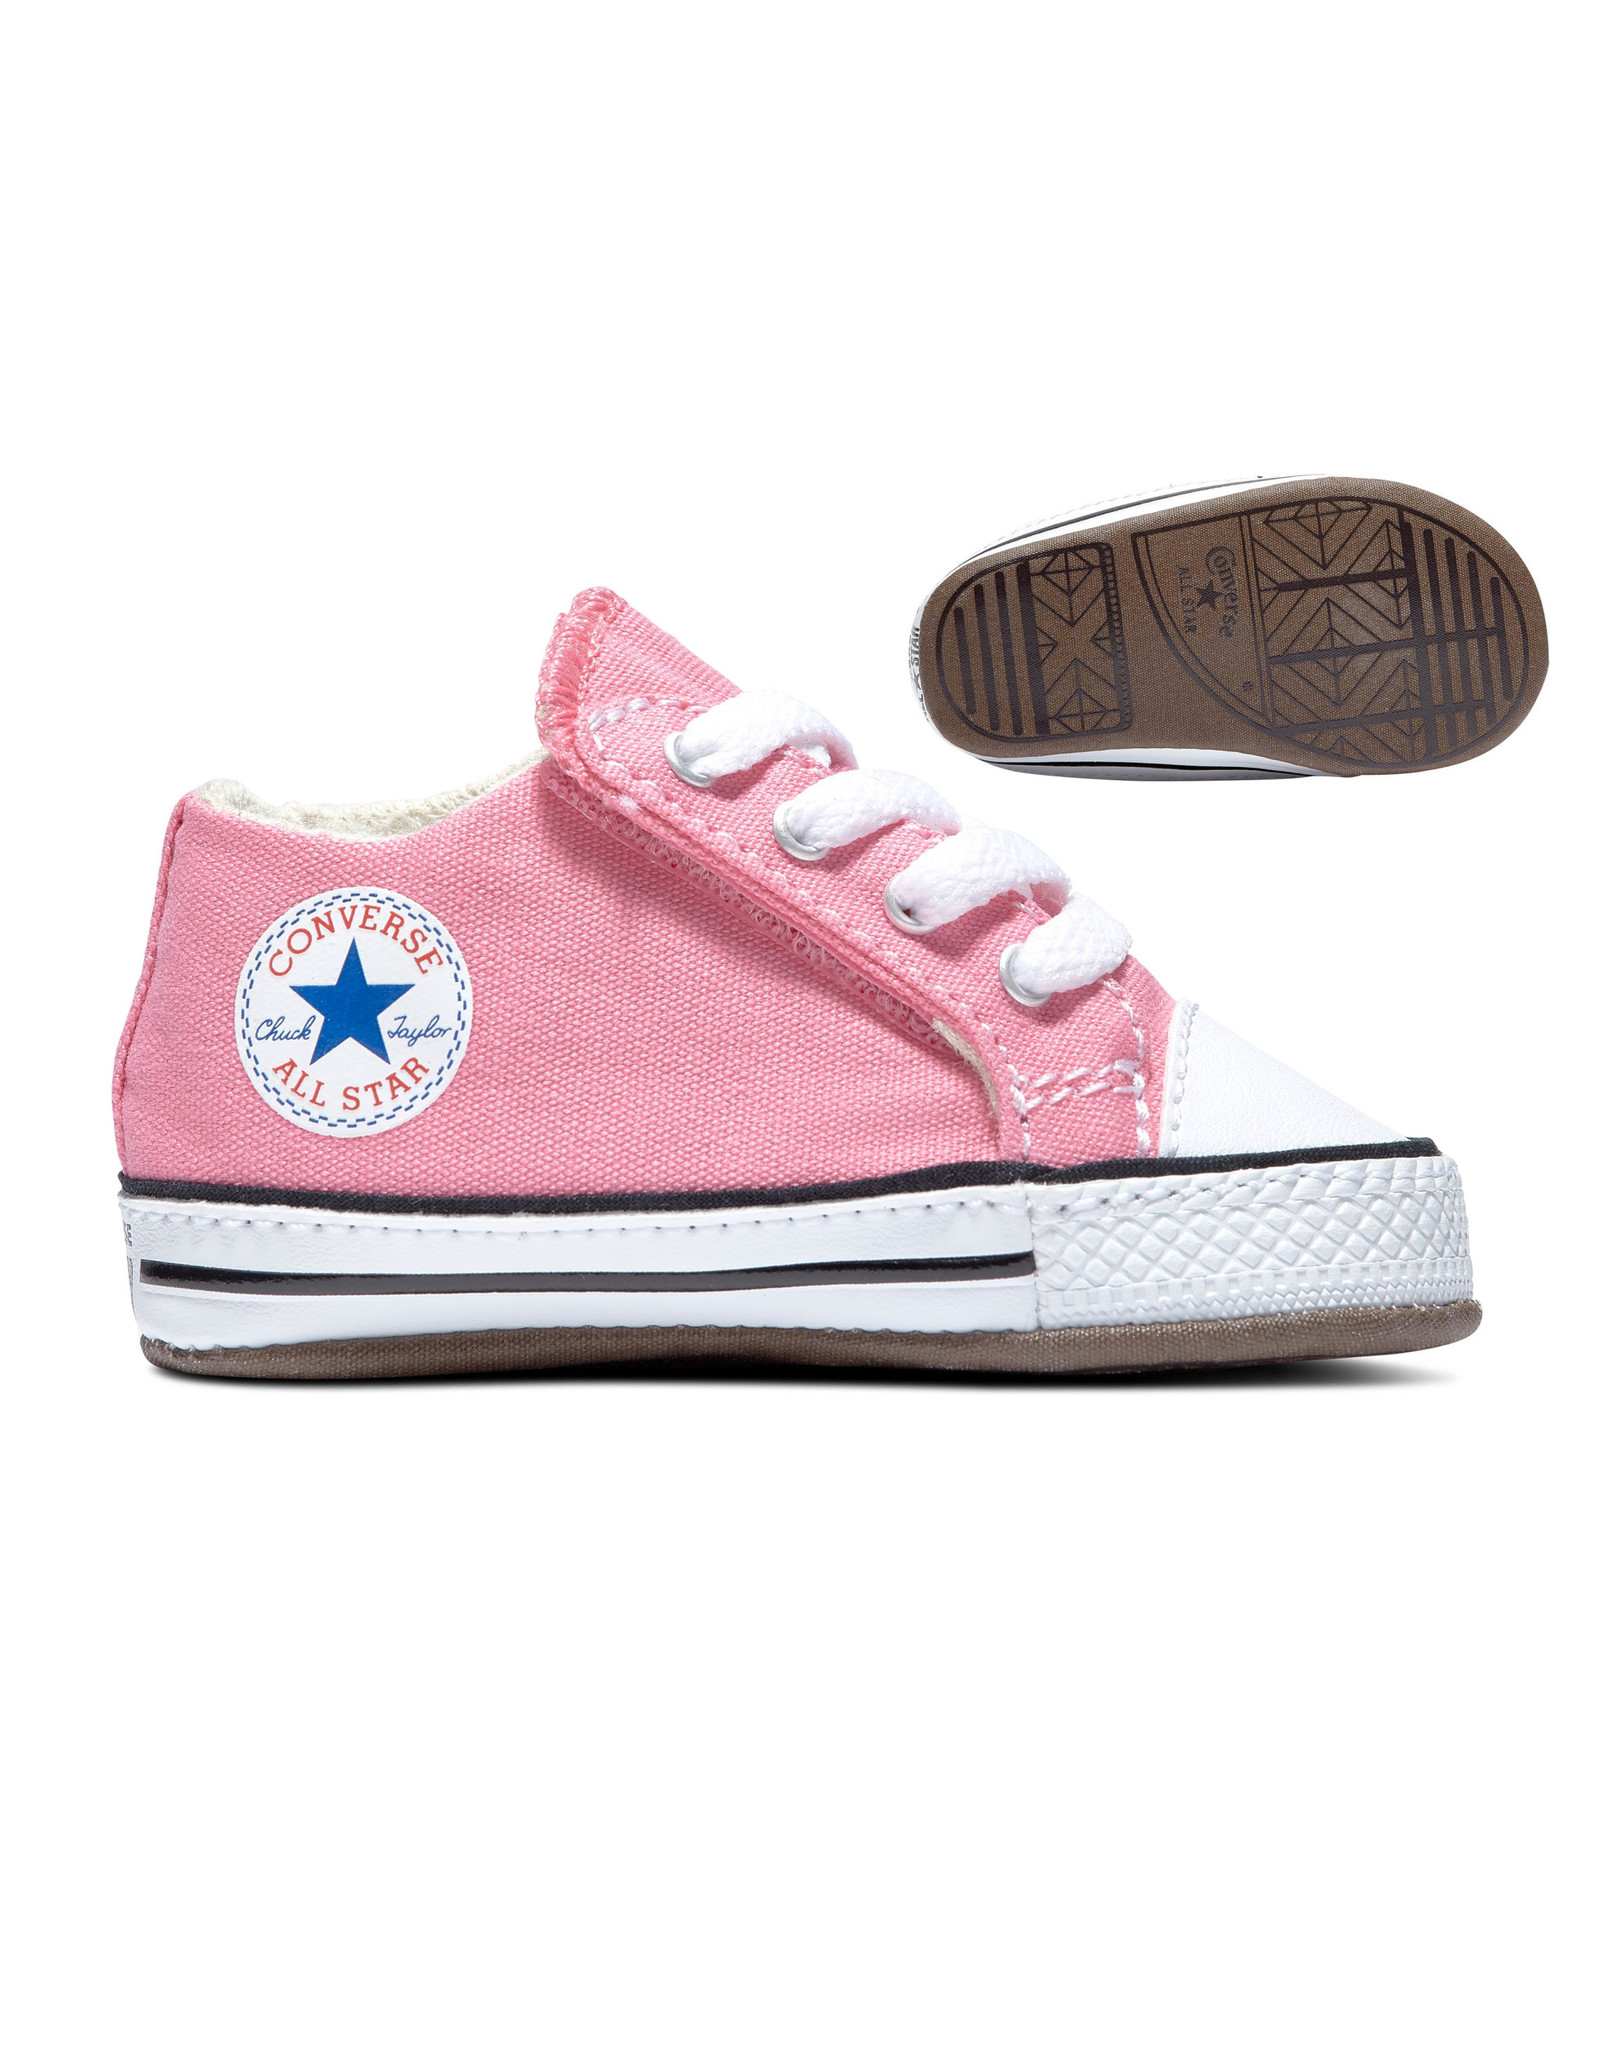 CHUCK TAYLOR ALL STAR CRIBSTER MID PINK/NATURAL IVORY C12PN-865160C